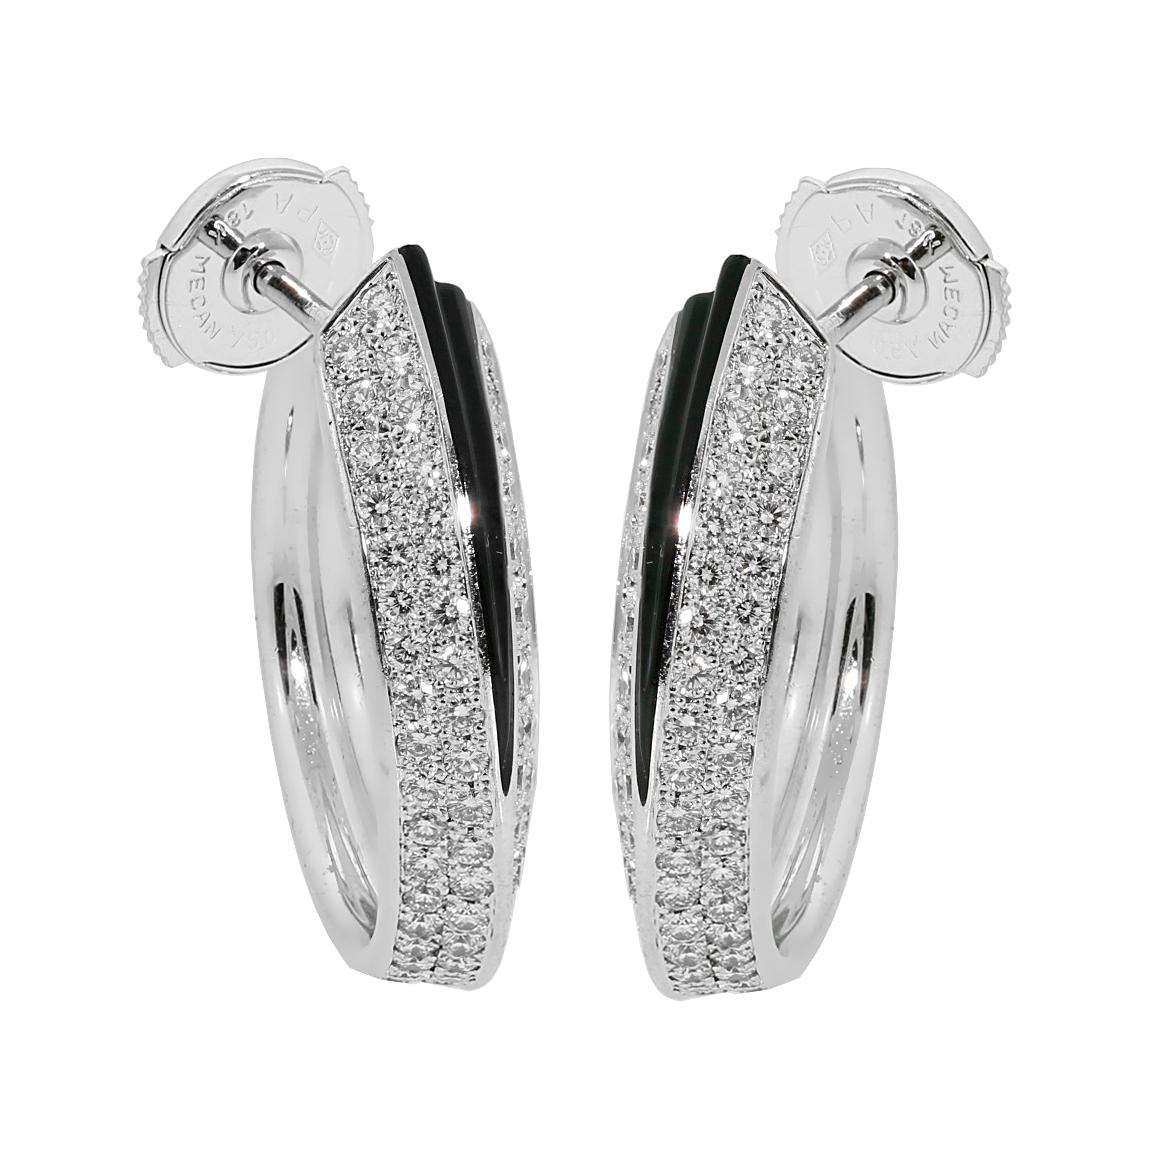 Cartier Panthere Diamond Onyx Gold Earrings In Excellent Condition For Sale In Feasterville, PA